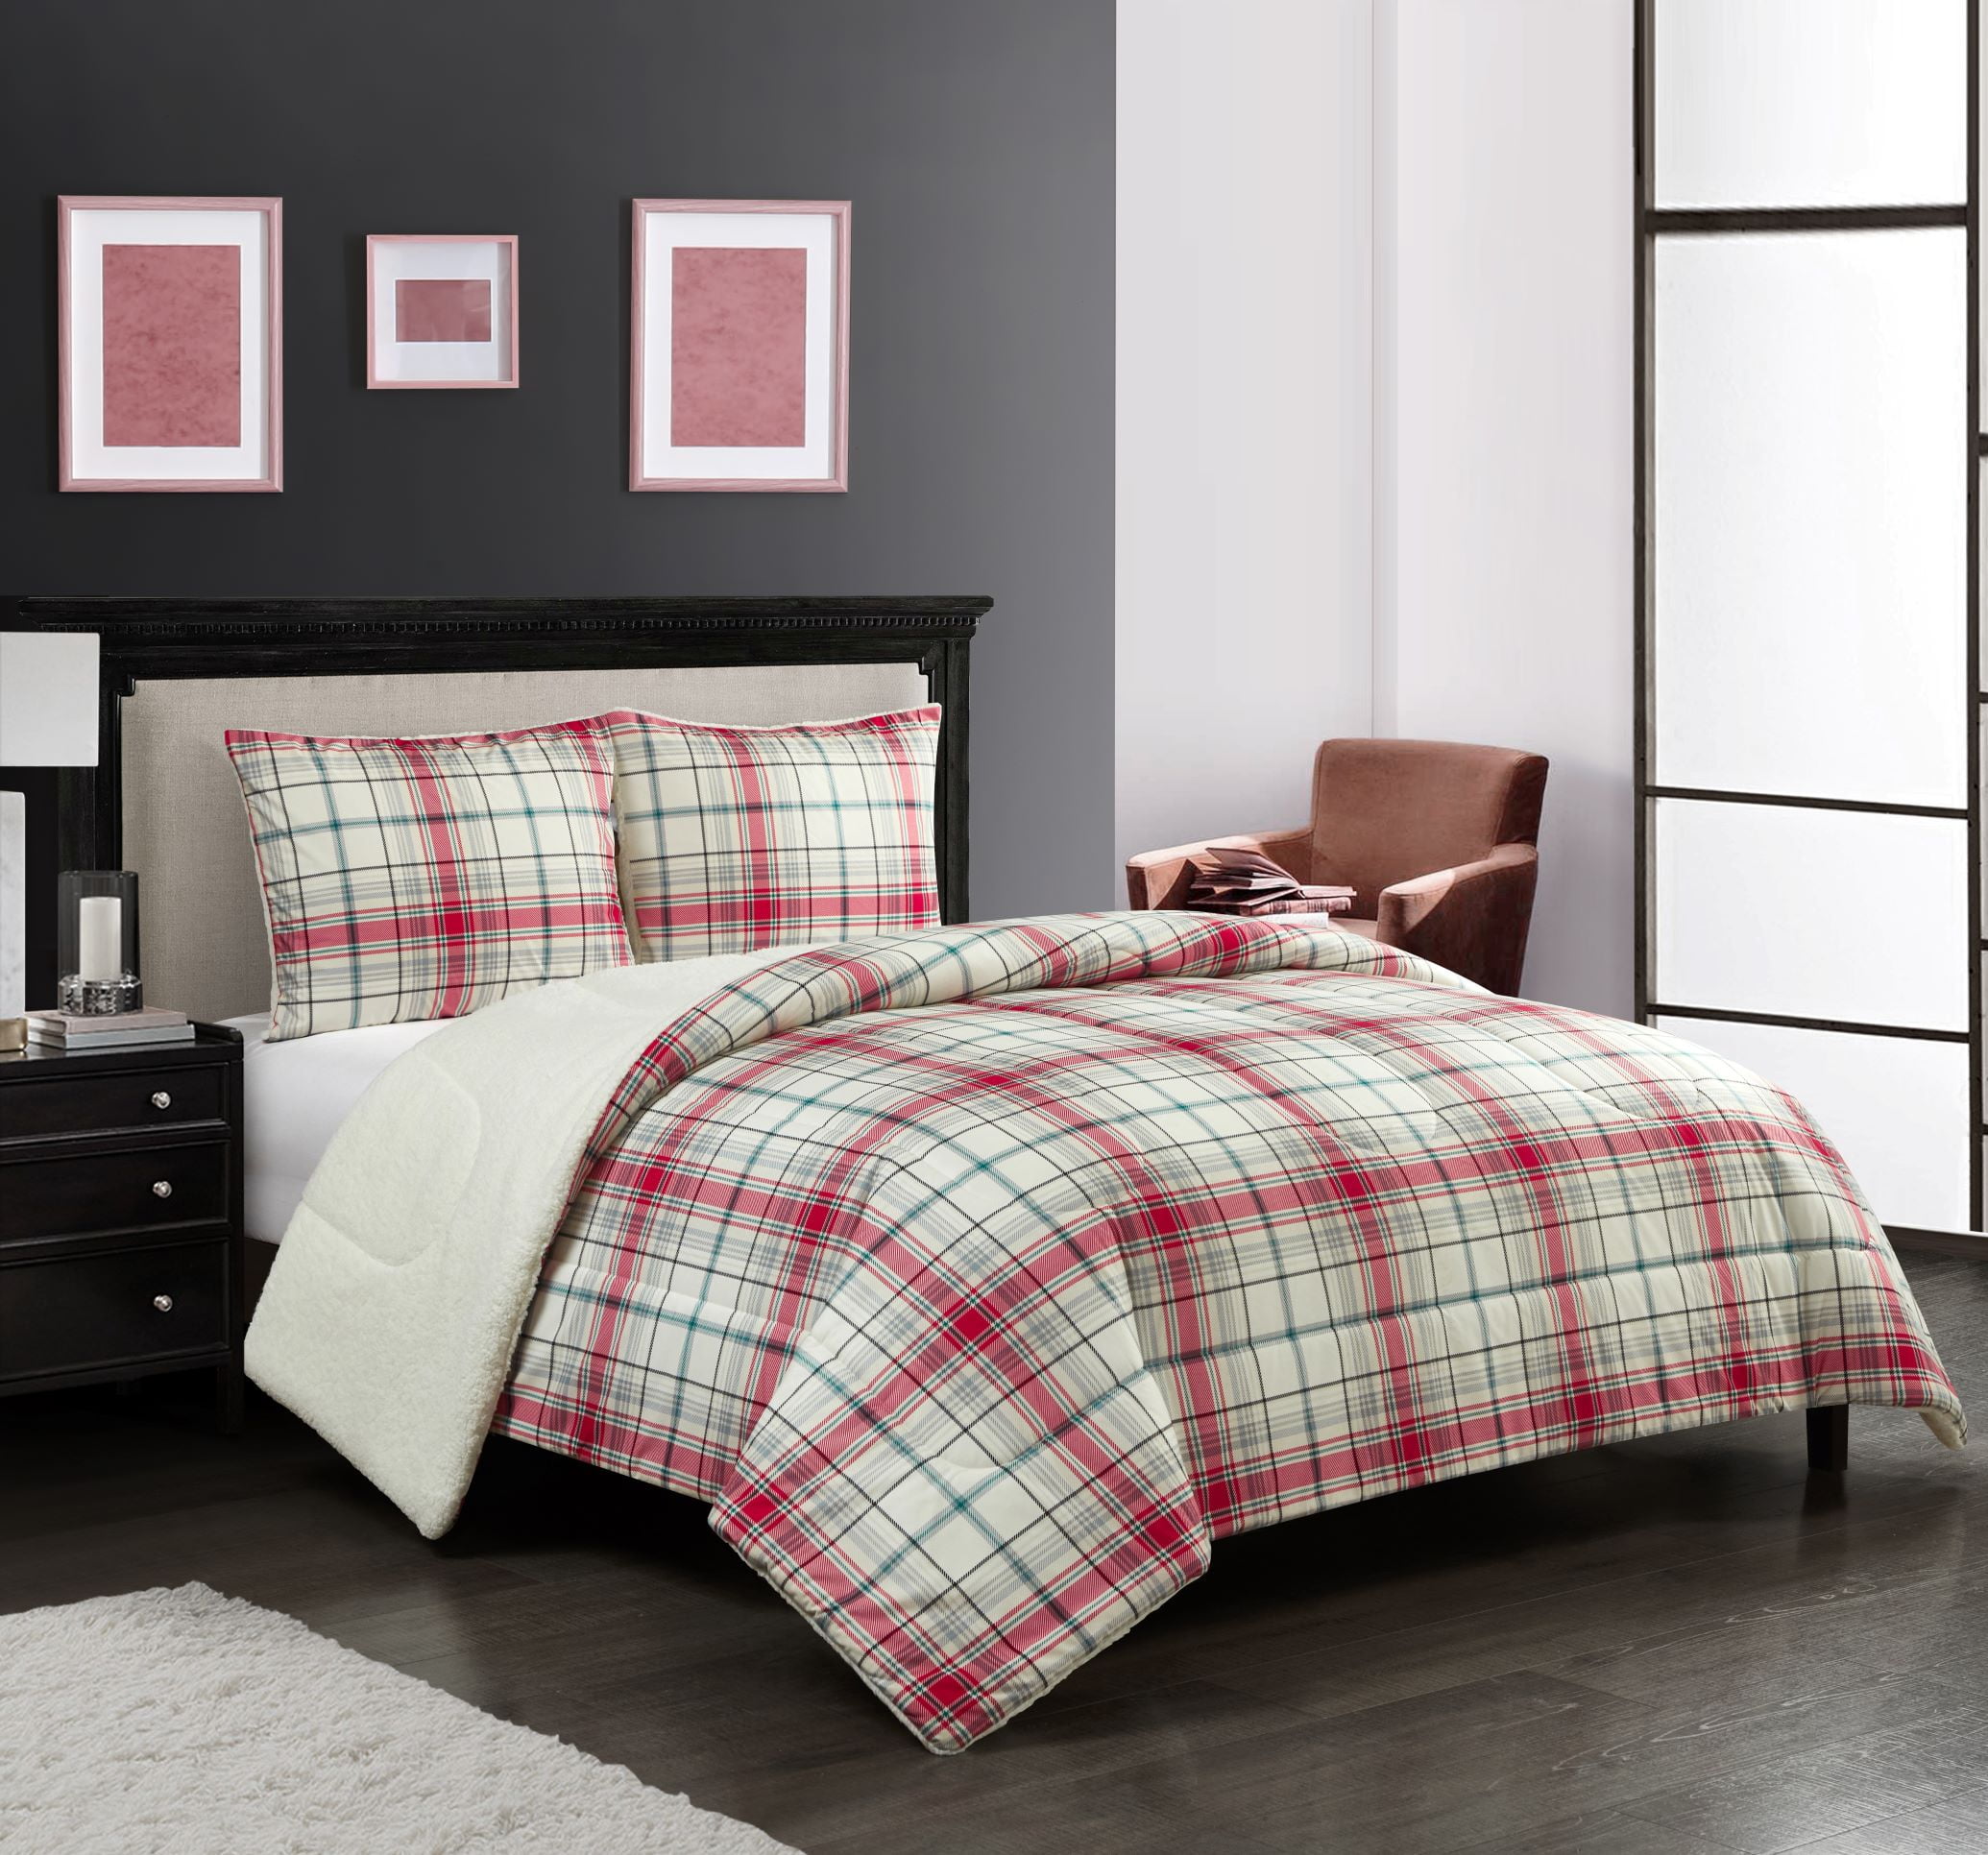 NEW ~ CLASSIC COZY BLACK GREY RED WHITE CABIN LODGE PLAID SOFT COMFORTER SET 